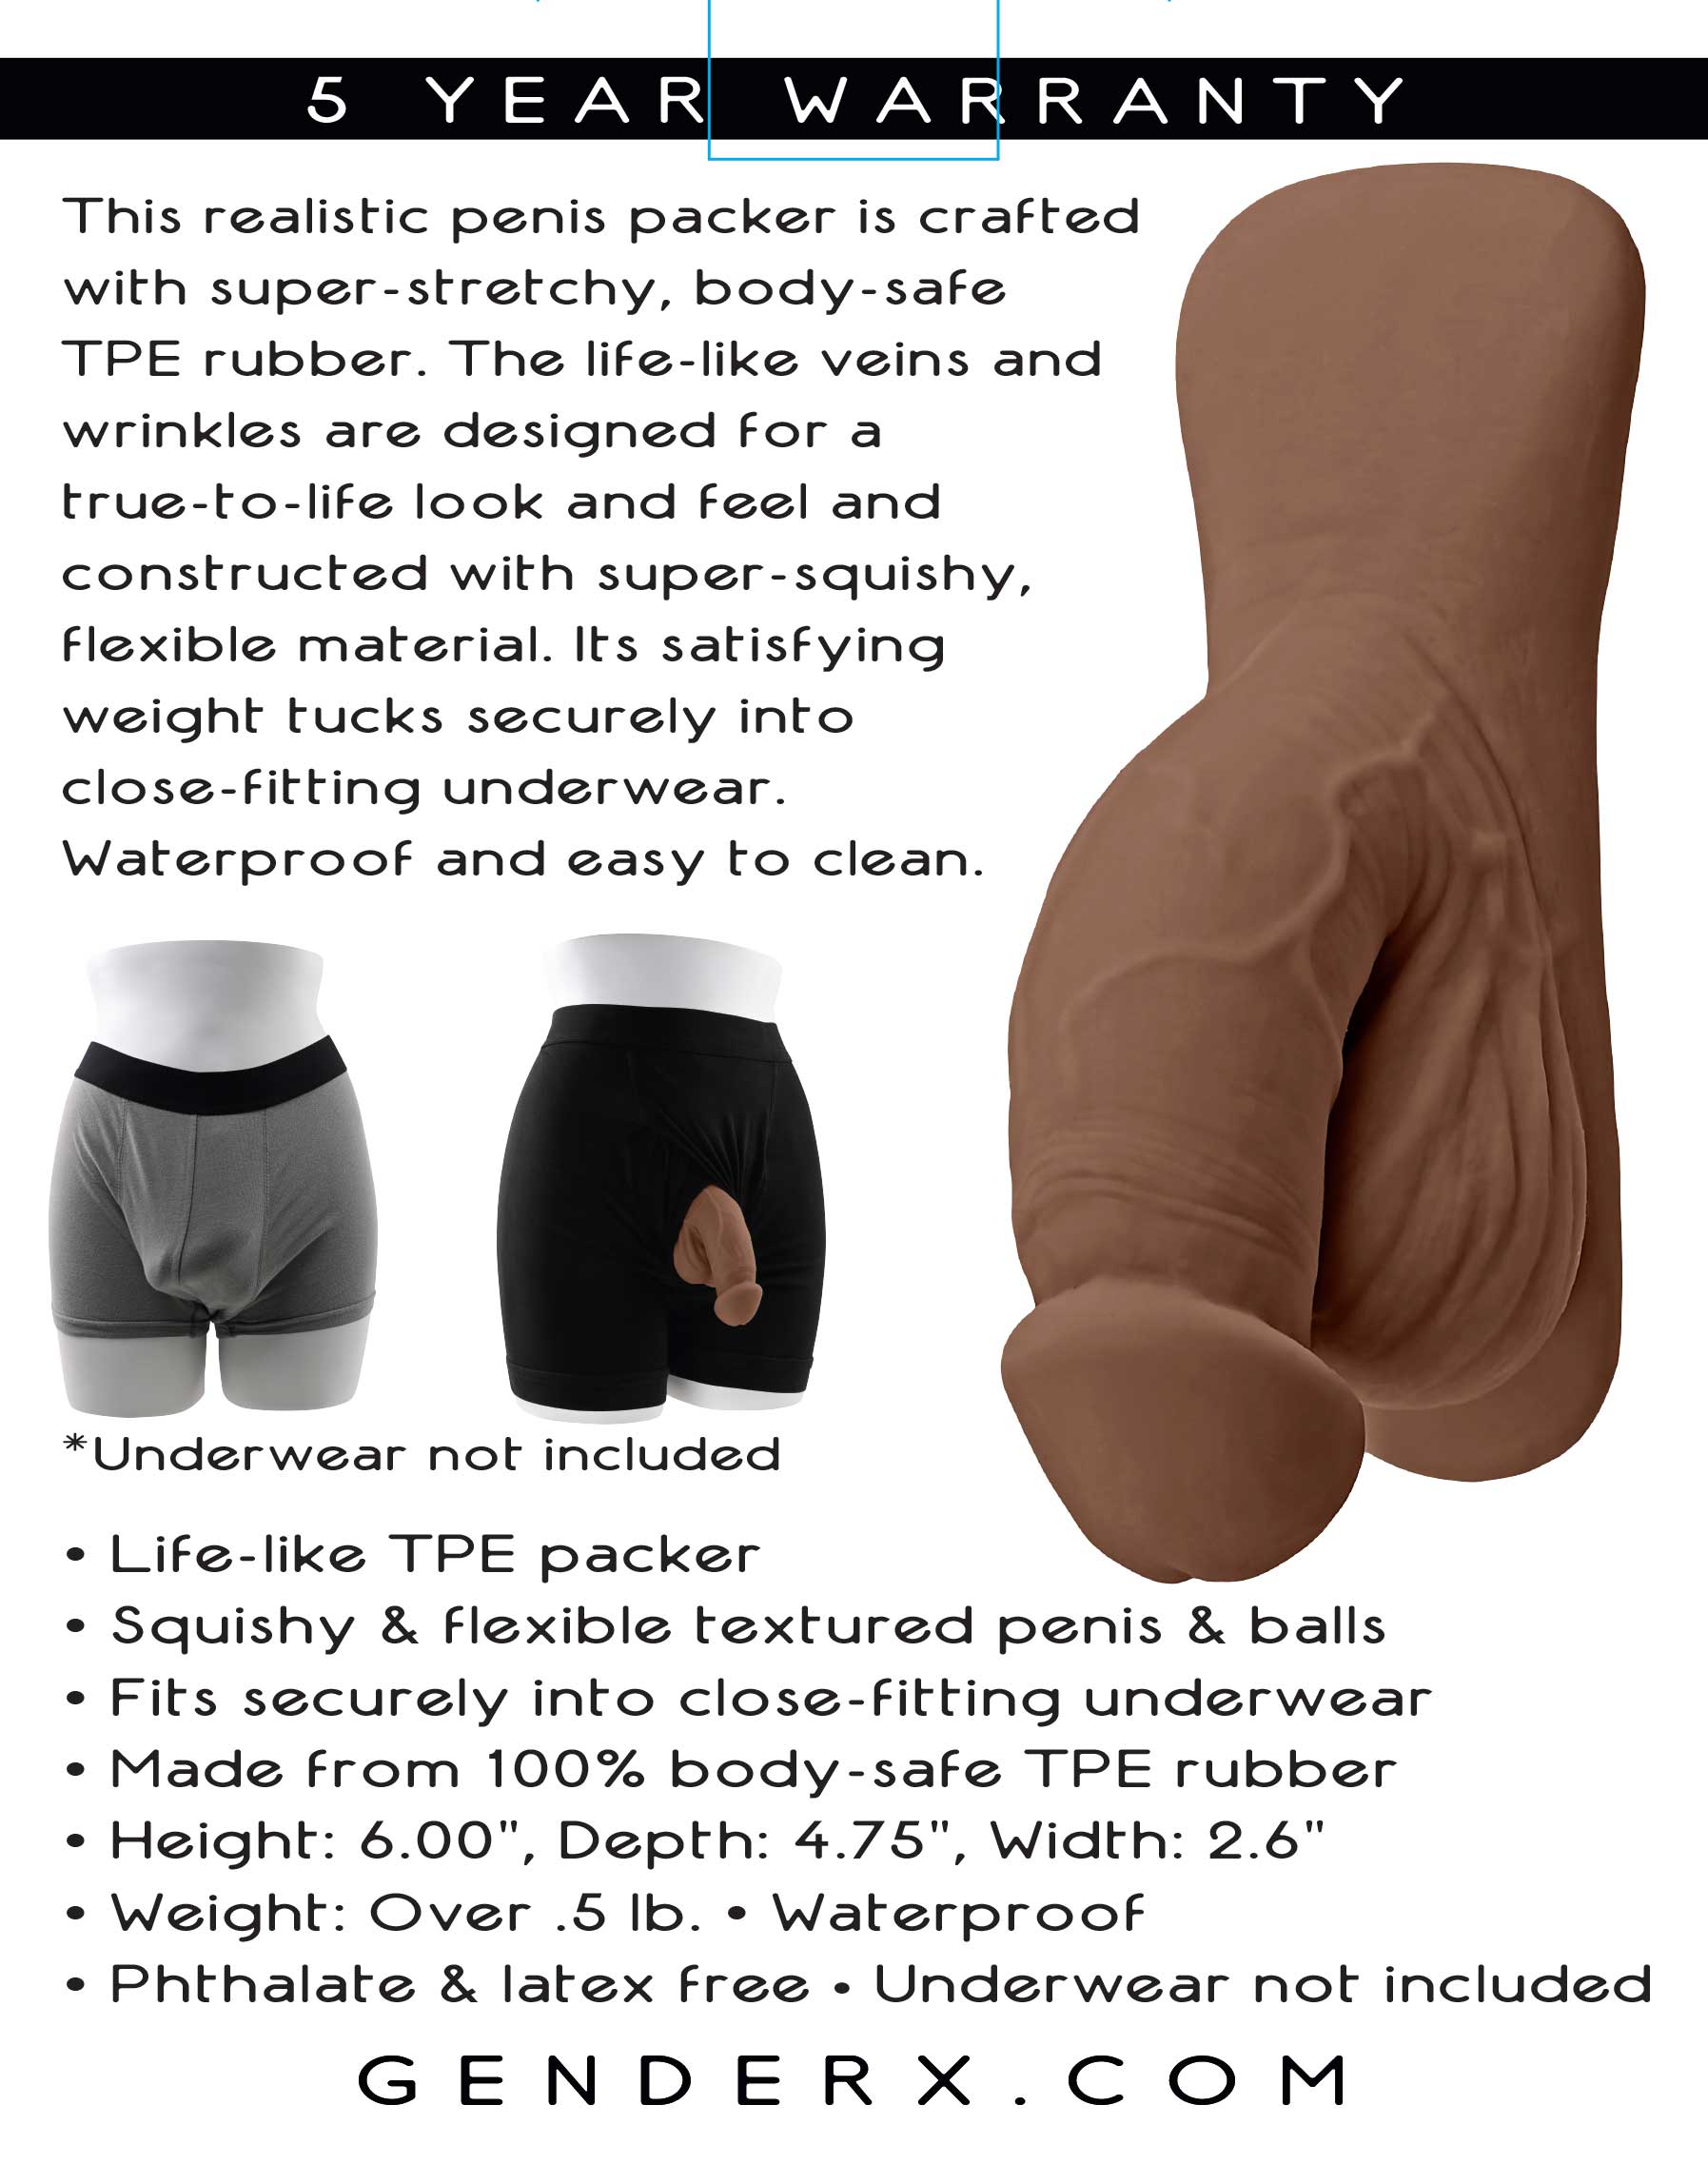 Enhance Your Confidence with the Realistic 4 Inch Packer - Dark